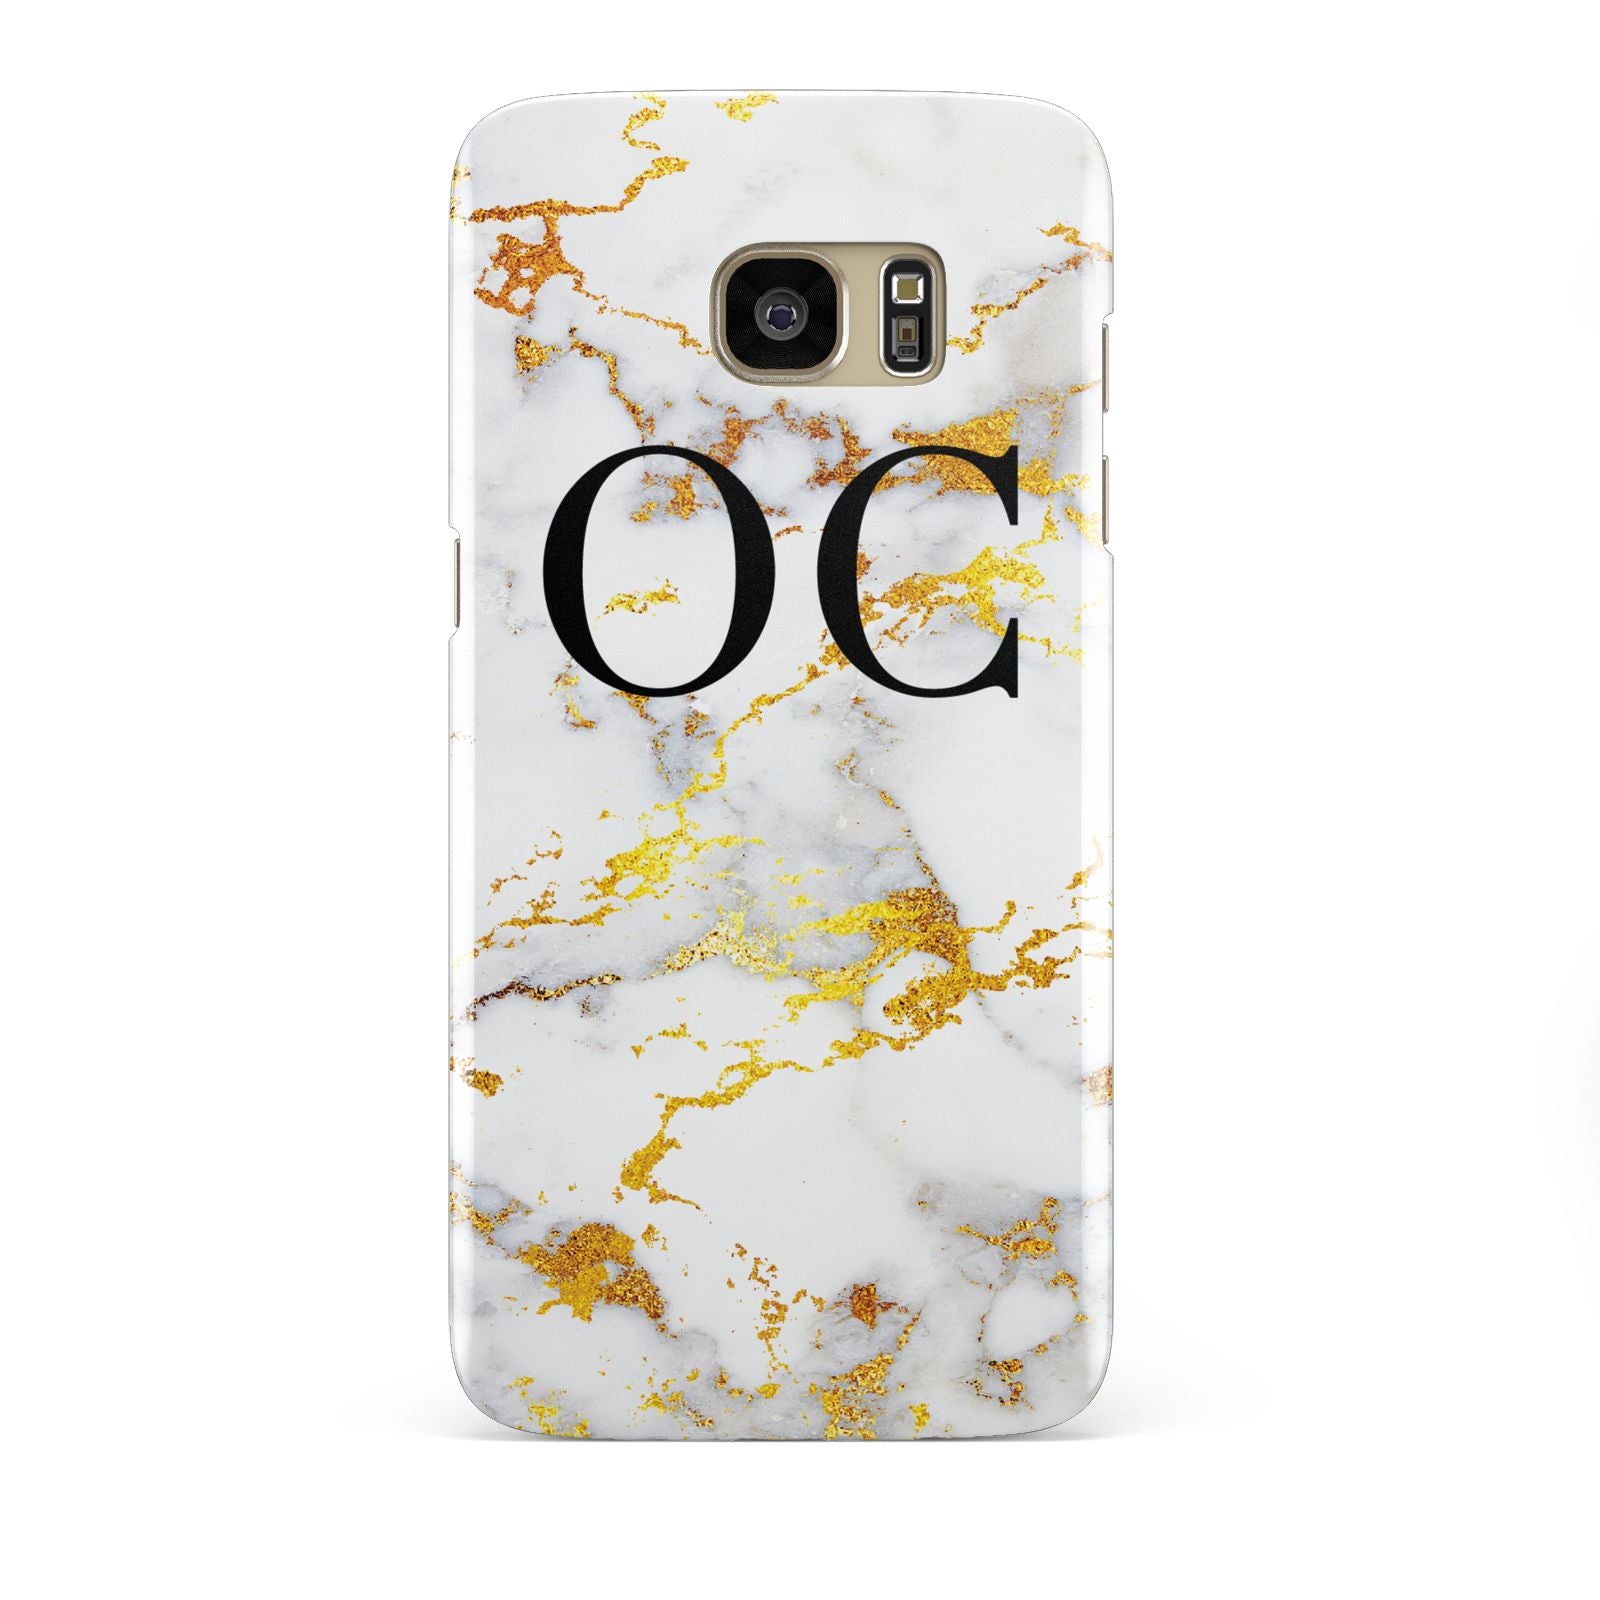 Personalised Gold Marble Initials Monogram Samsung Galaxy S7 Edge Case